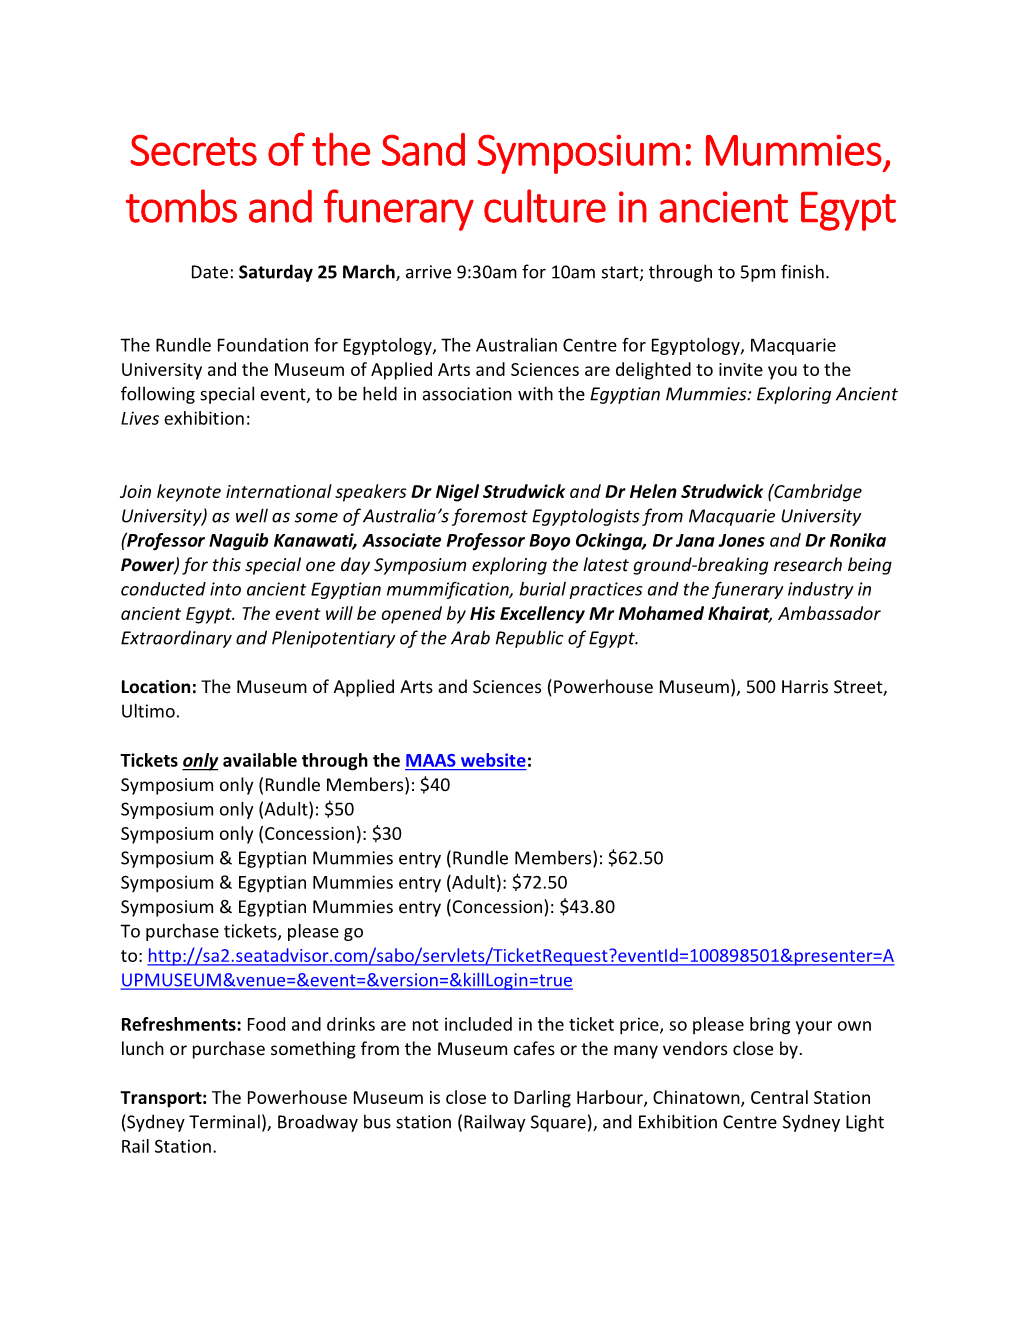 Secrets of the Sand Symposium: Mummies, Tombs and Funerary Culture in Ancient Egypt